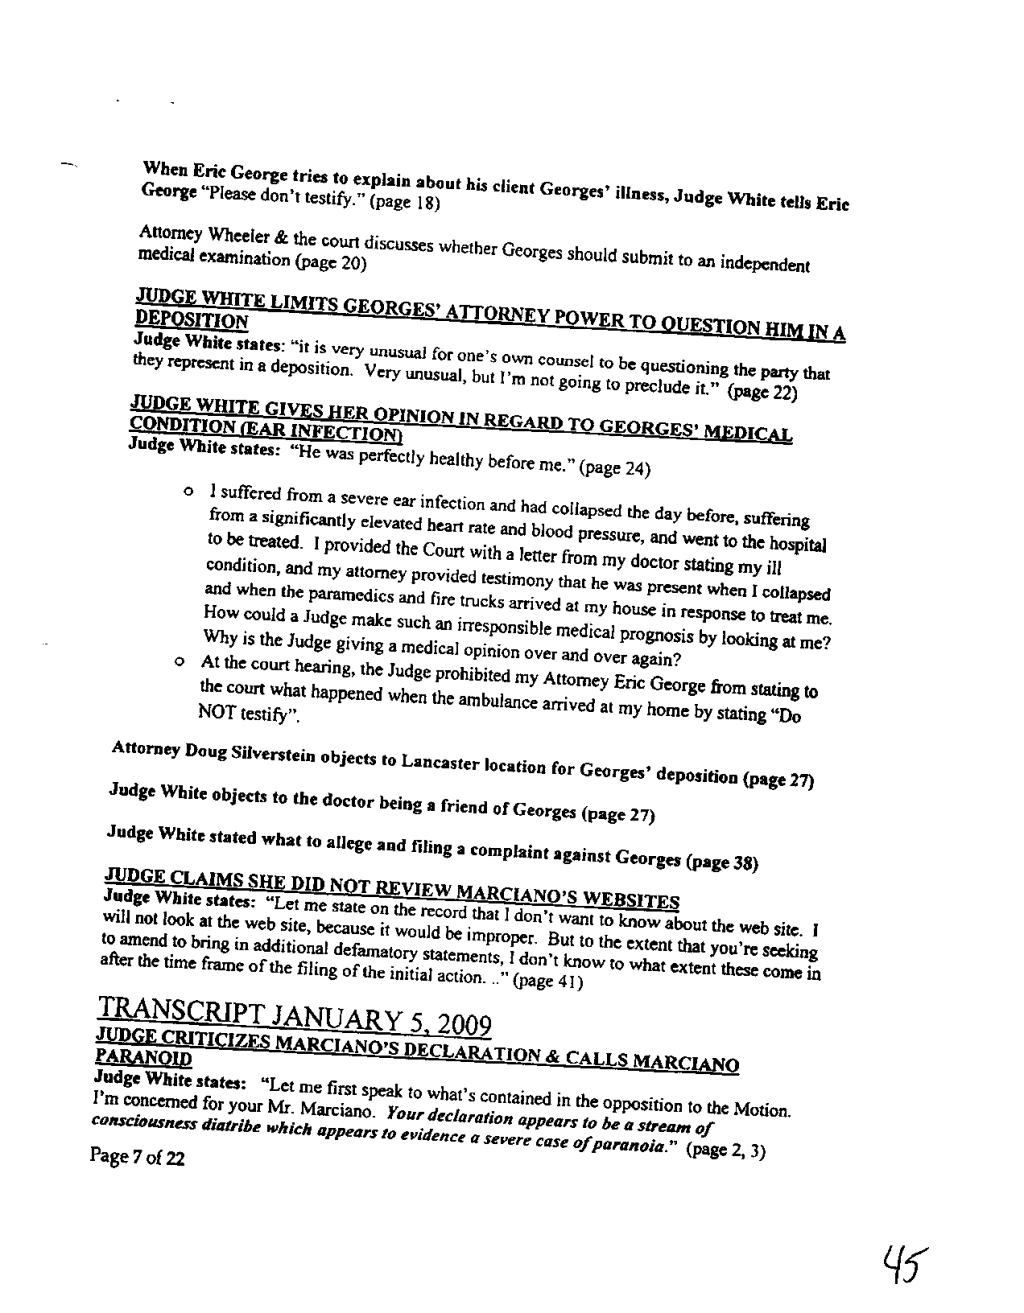 full complaint judge white for federal with exhibits_1_page36